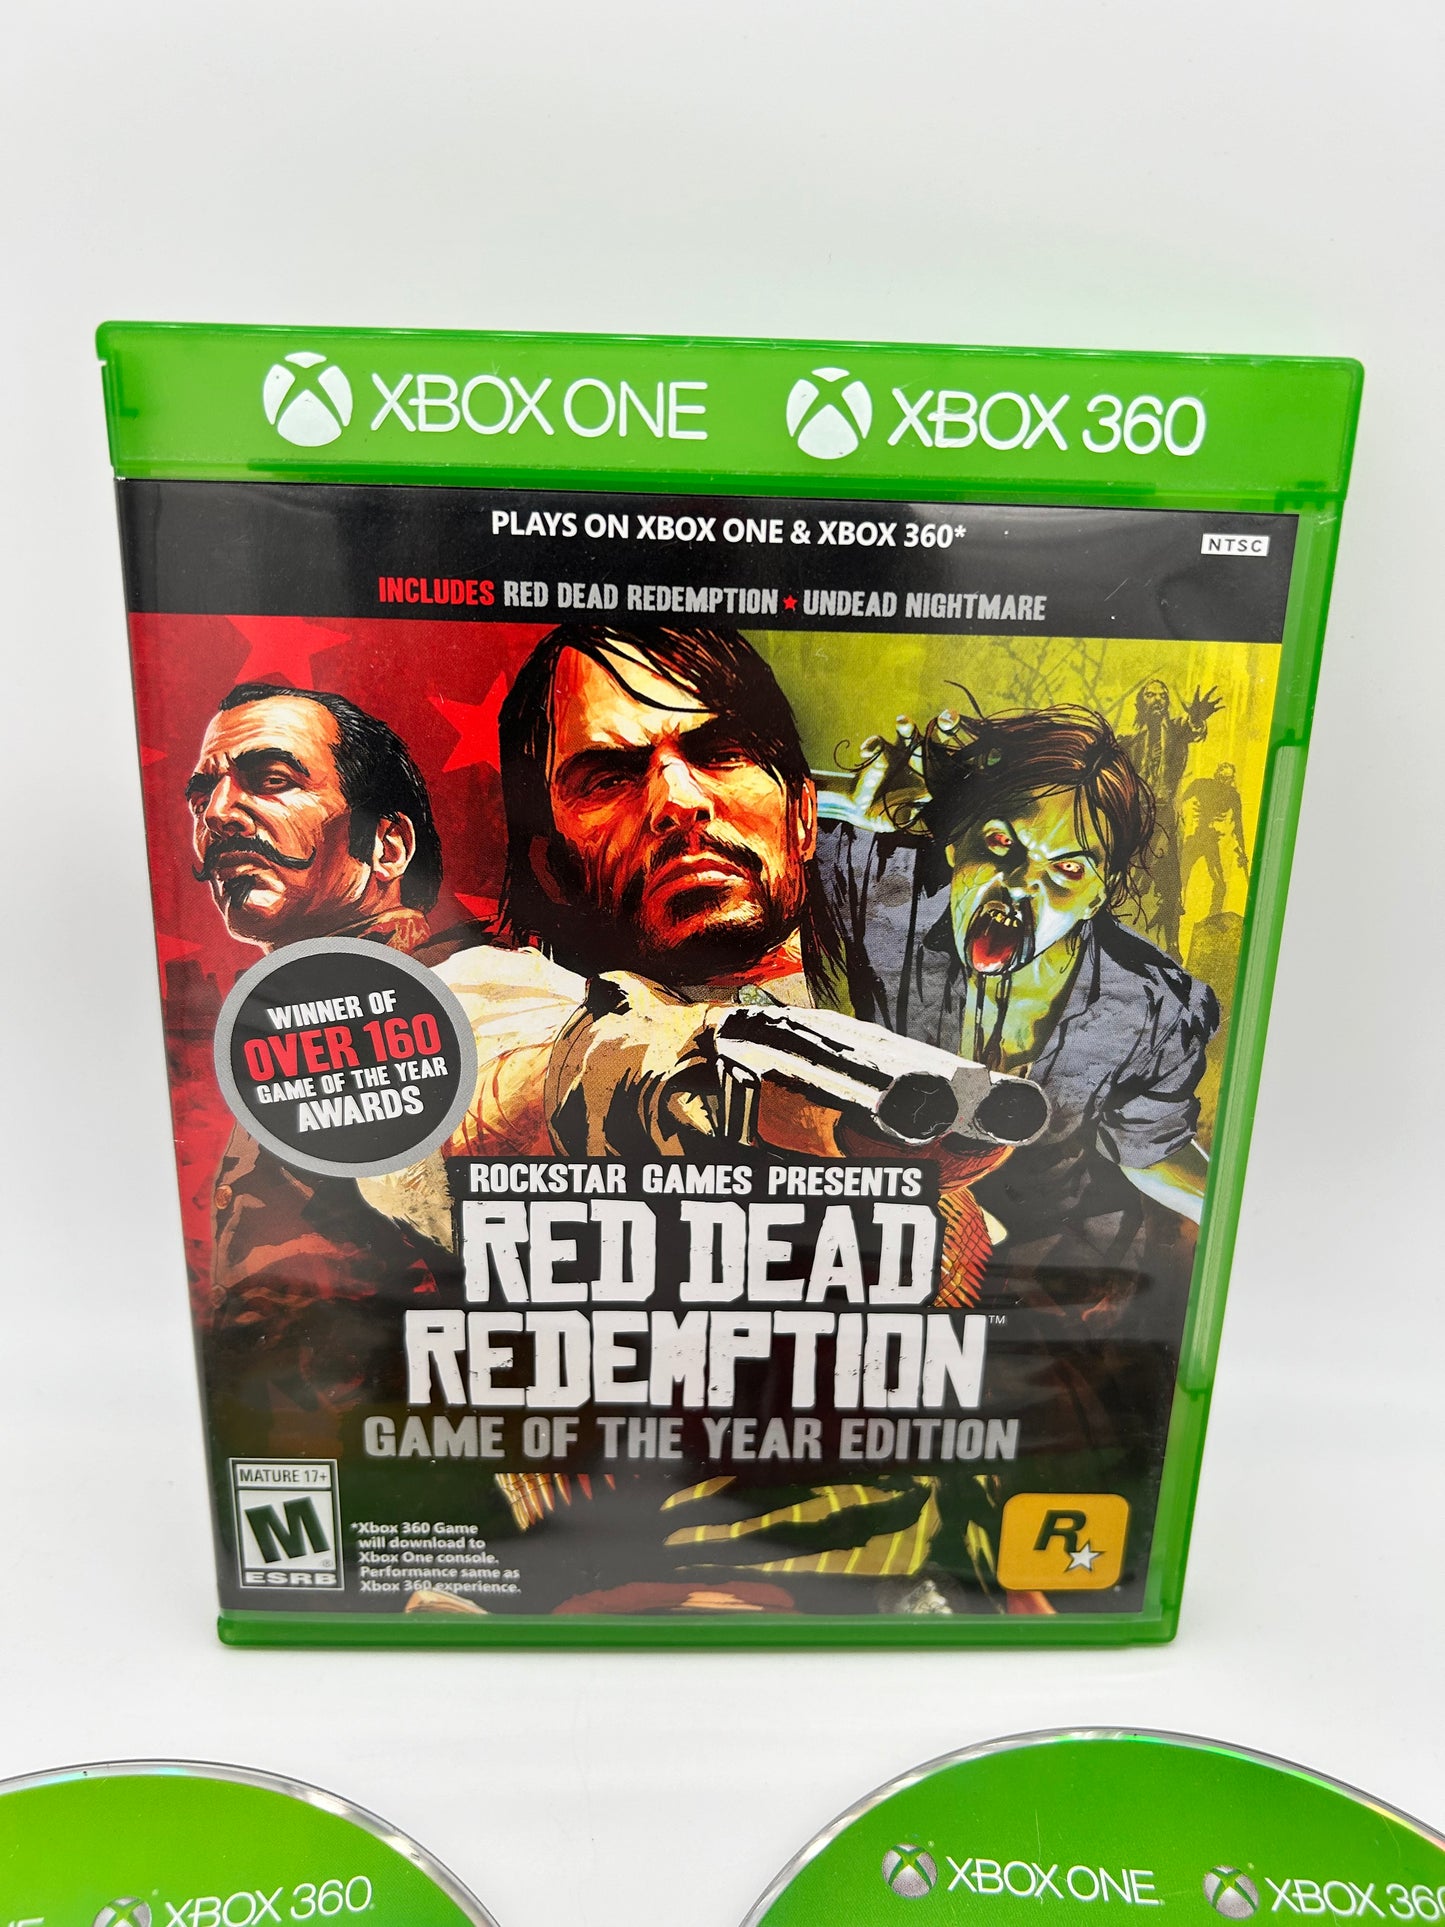 MiCROSOFT XBOX 360 & ONE | RED DEAD REDEMPTiON & UNDEAD NiGHTMARE | GAME OF THE YEAR EDiTiON